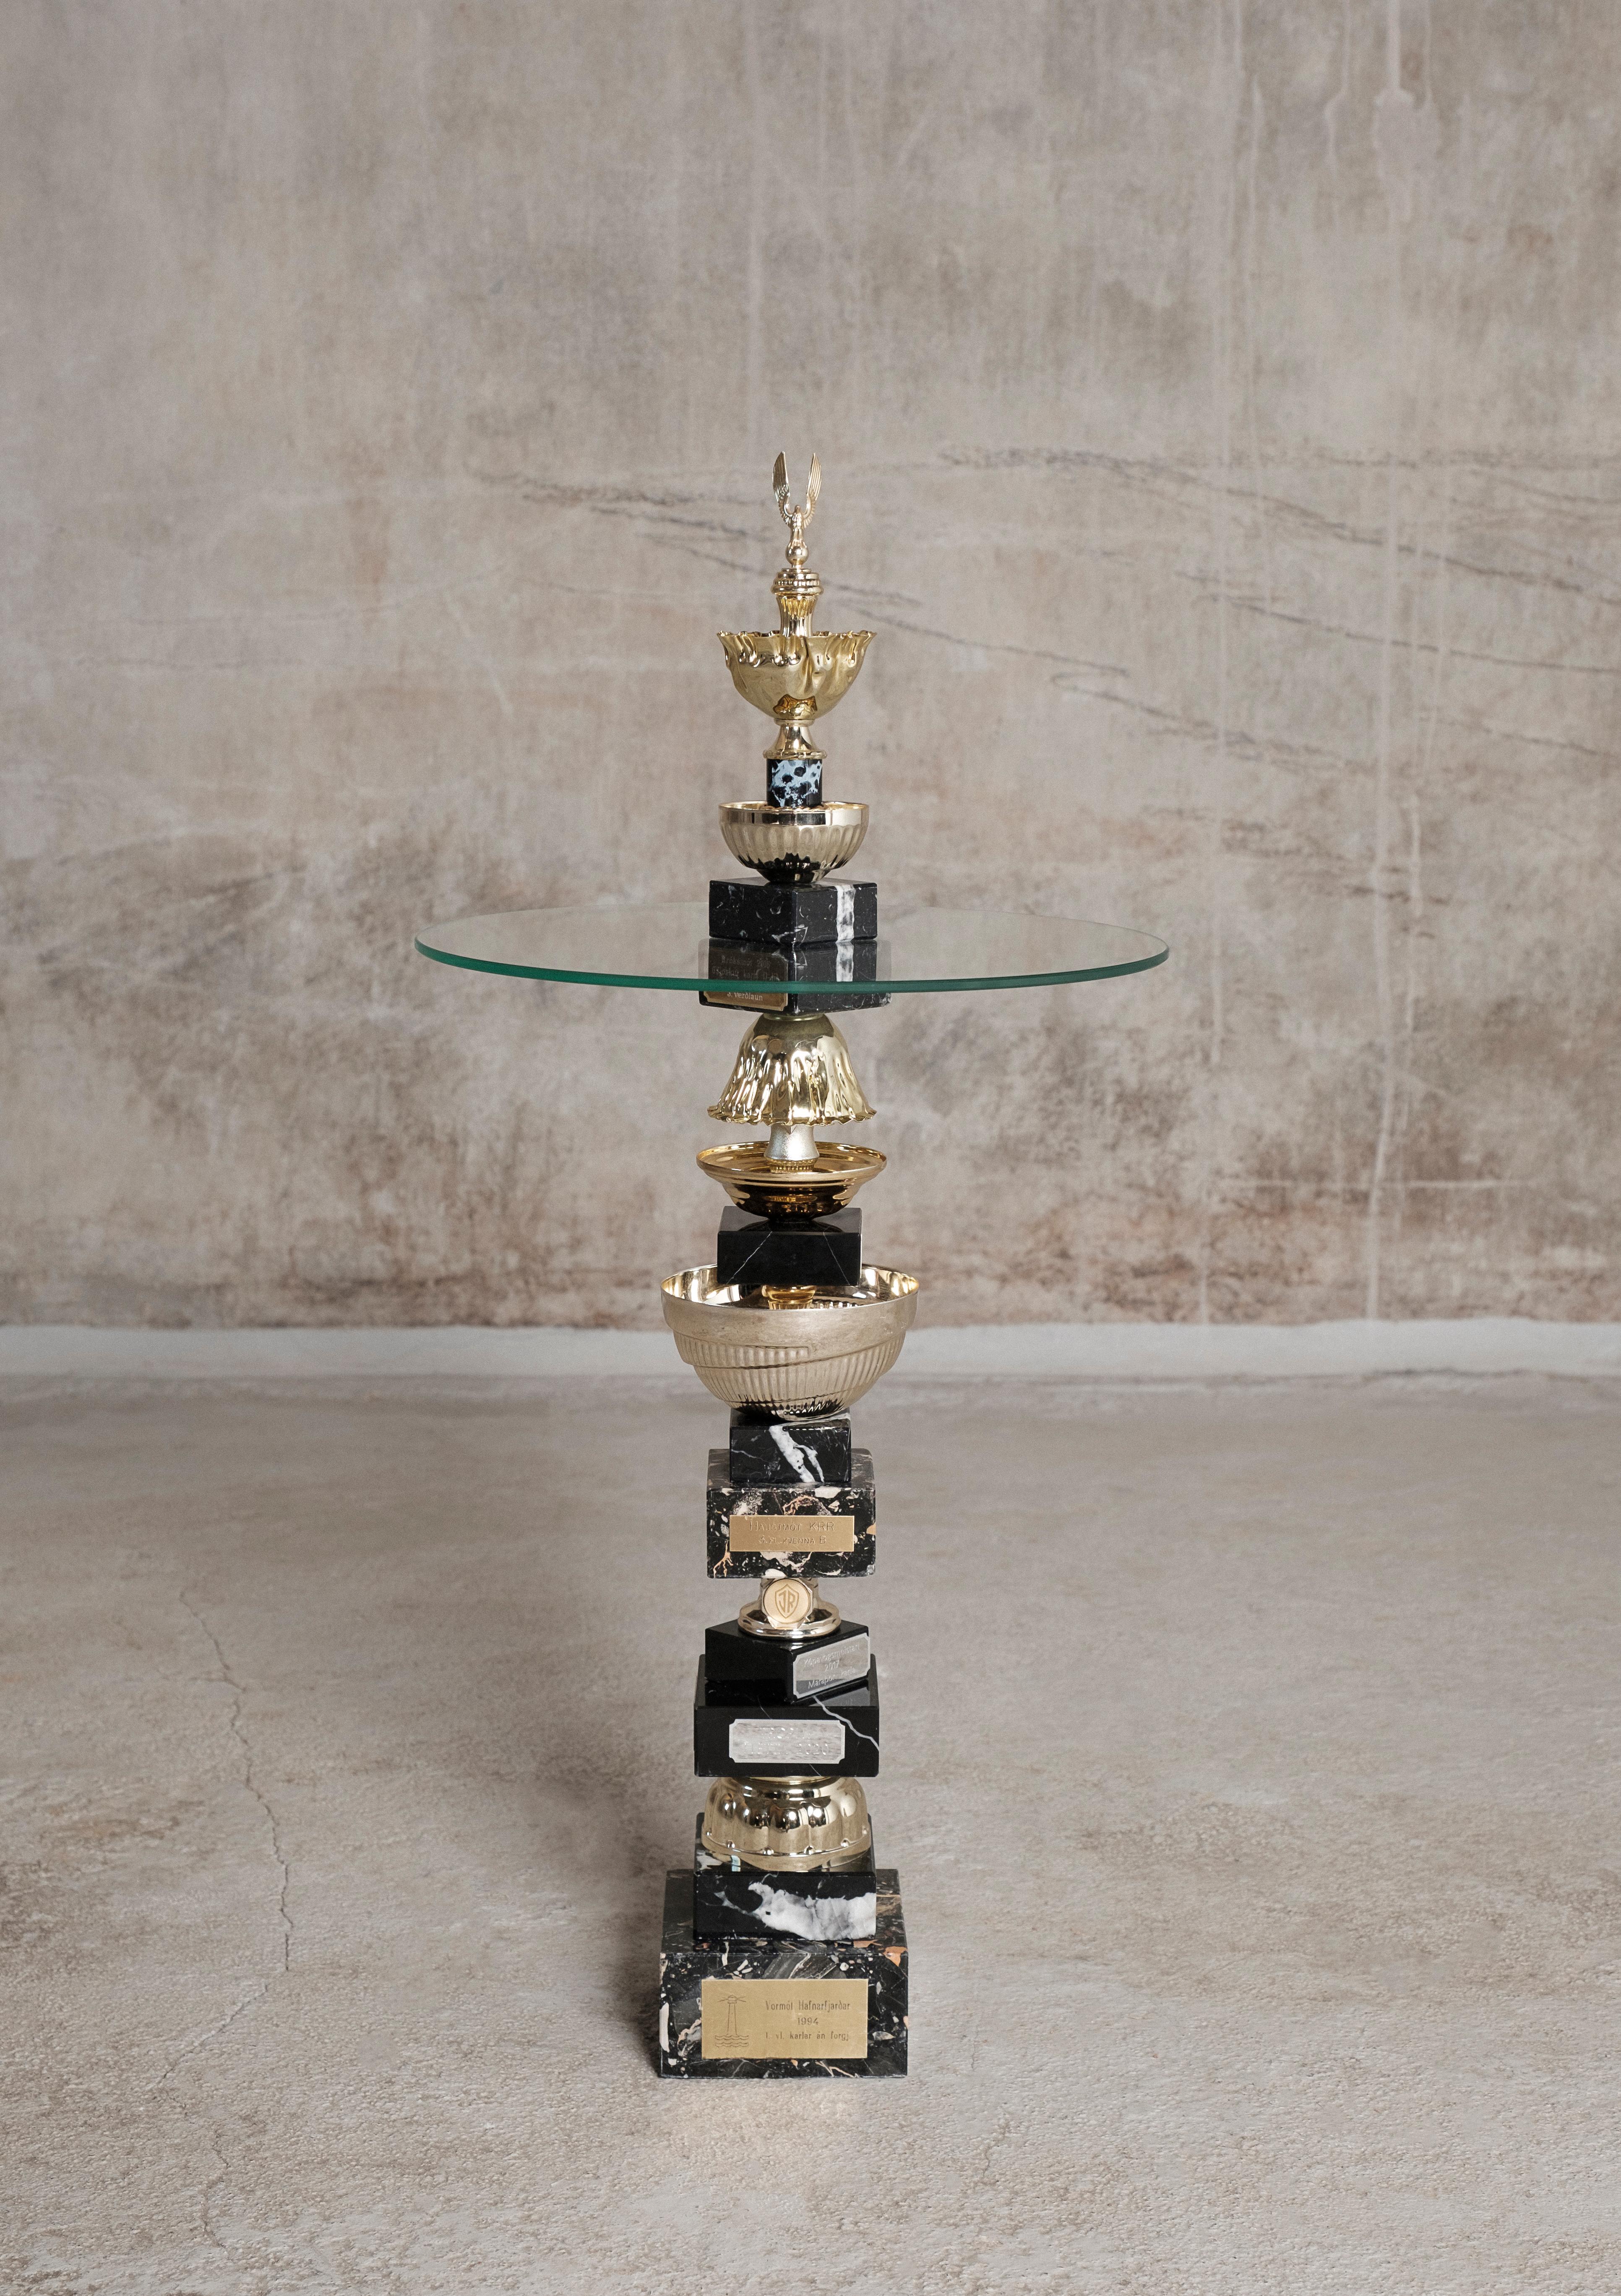 The Falcon table by Flétta
Dimensions: 87 x 62 cm
Materials: gold, black marble

Trophy is a collection of tables, lights, flowerpots and shelves made of old trophies collected from athletes and sports clubs in Iceland. Trophies are a part of